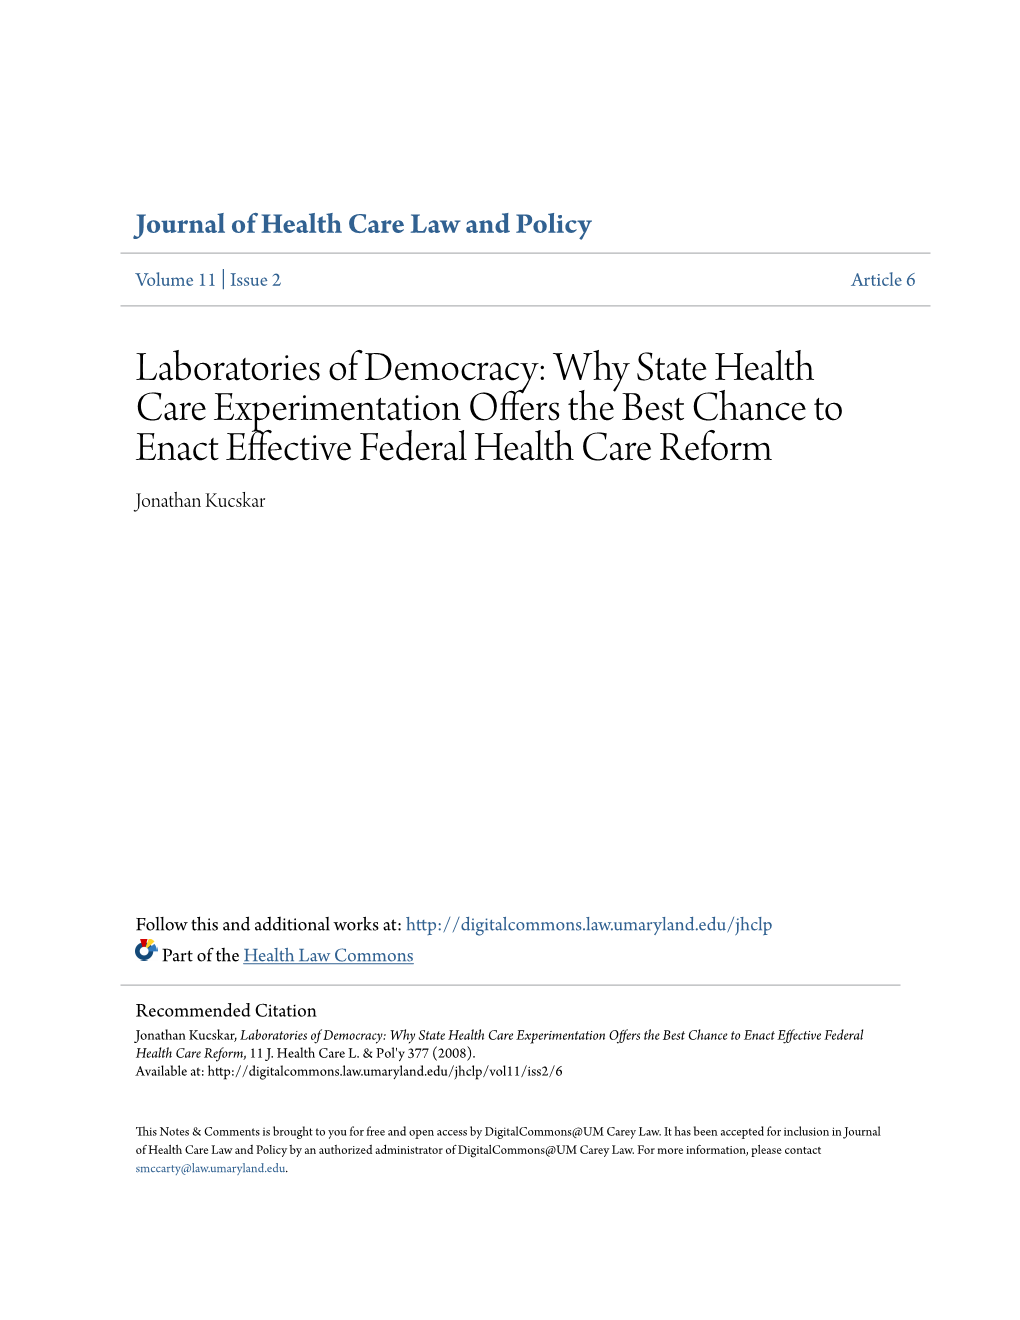 Laboratories of Democracy: Why State Health Care Experimentation Offers the Best Chance to Enact Effective Federal Health Care Reform Jonathan Kucskar